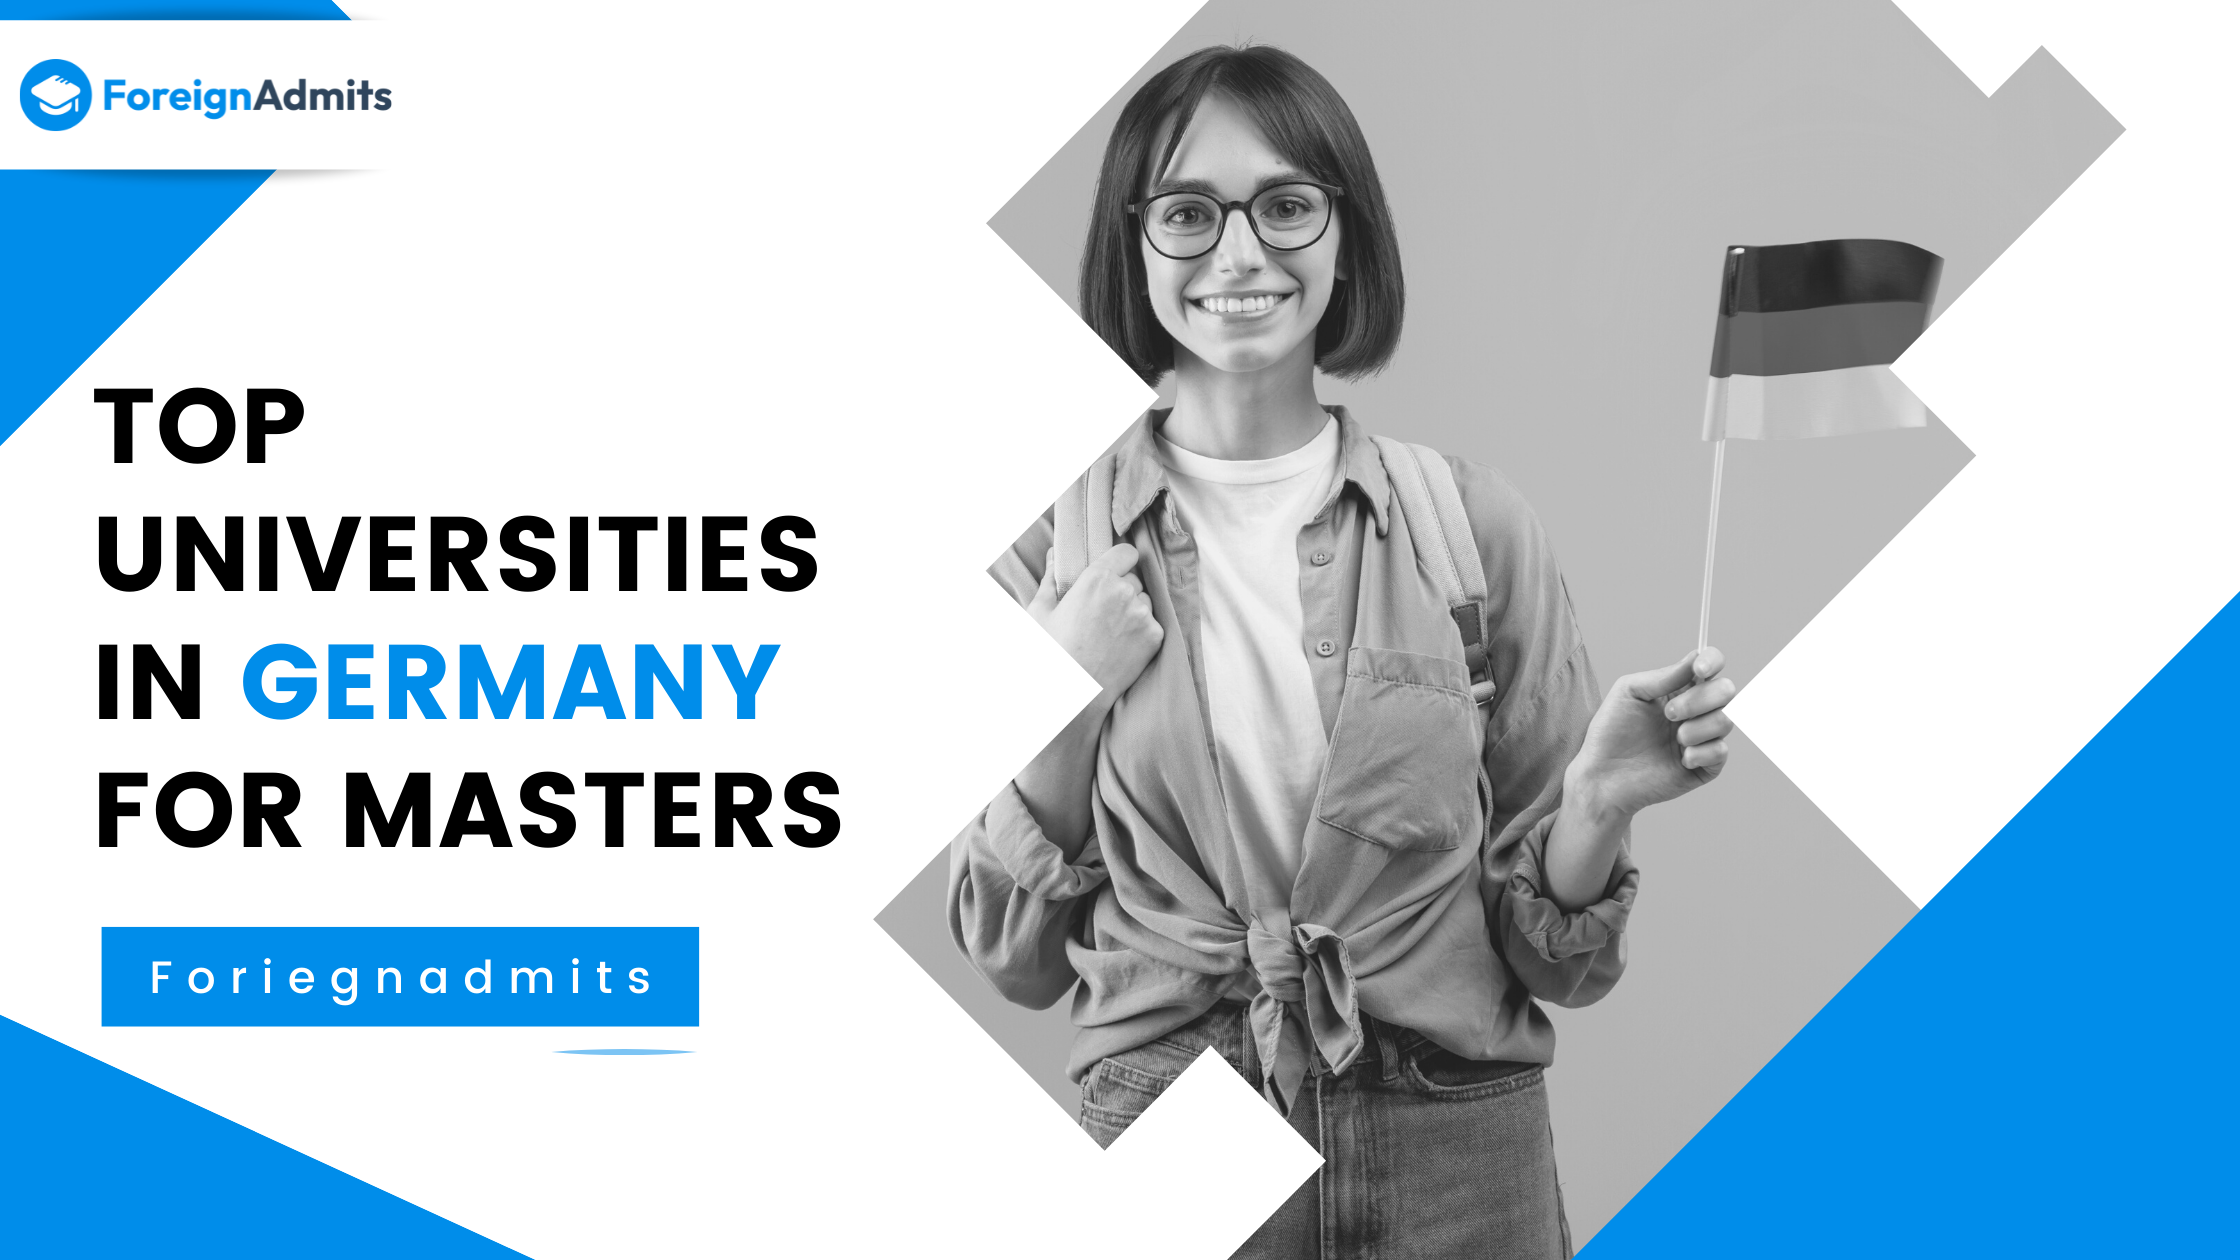 Top Universities in Germany for Masters